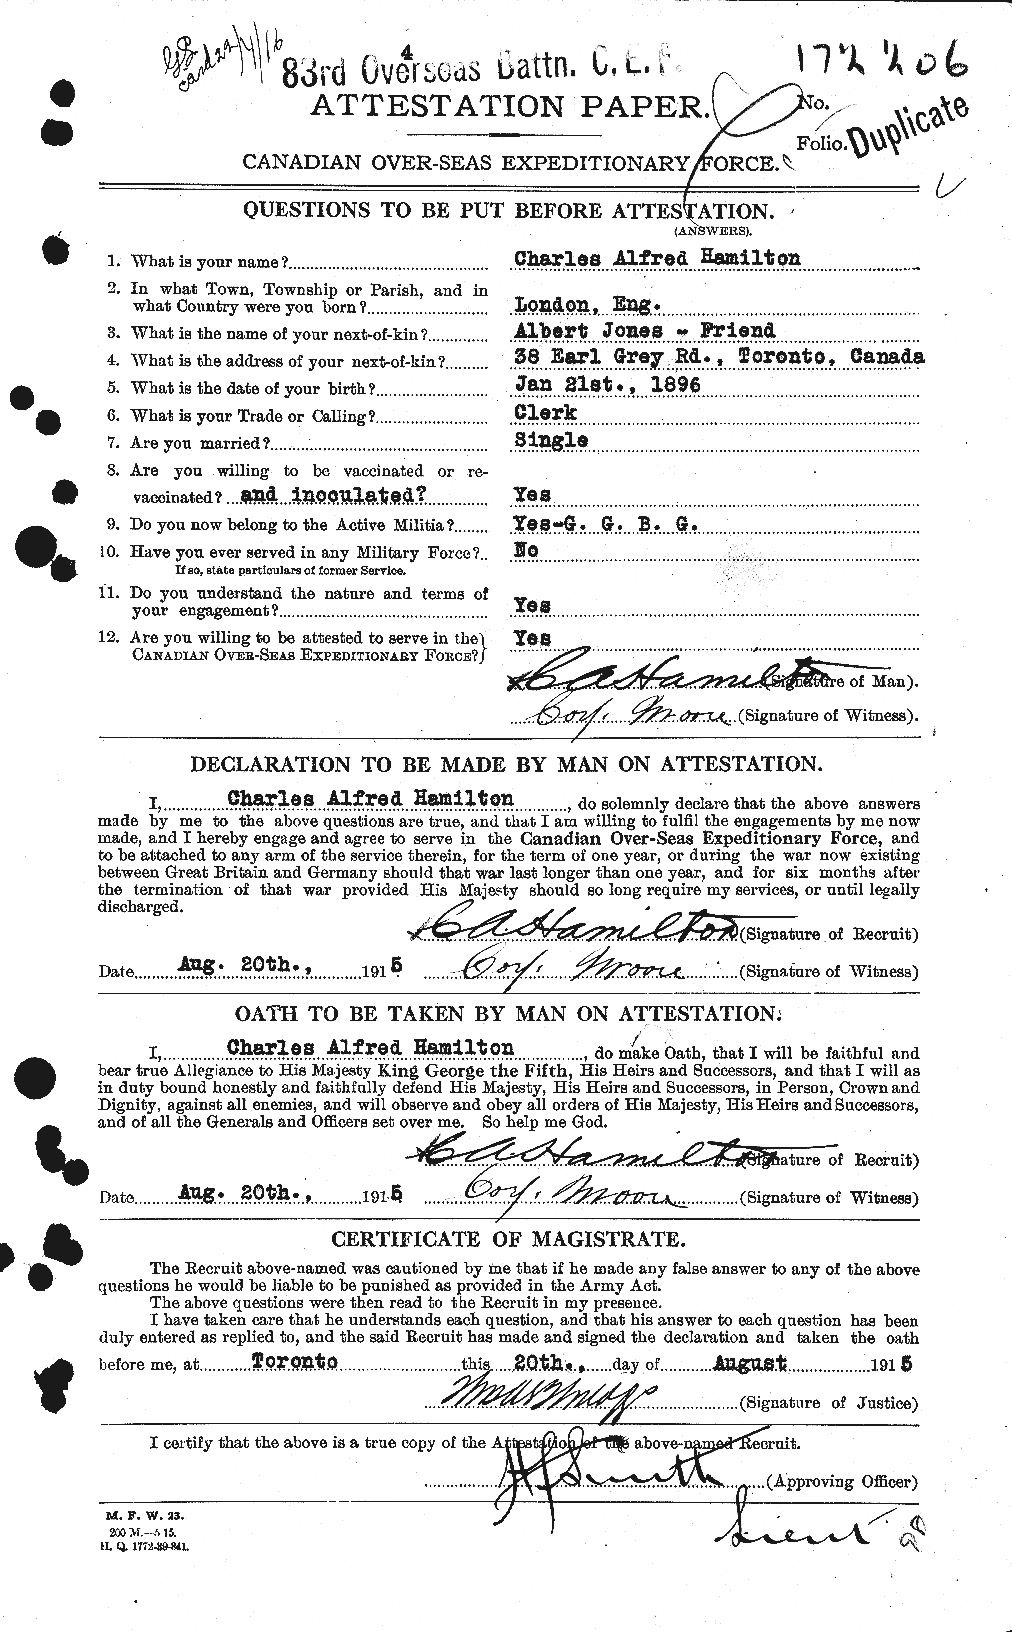 Personnel Records of the First World War - CEF 375302a